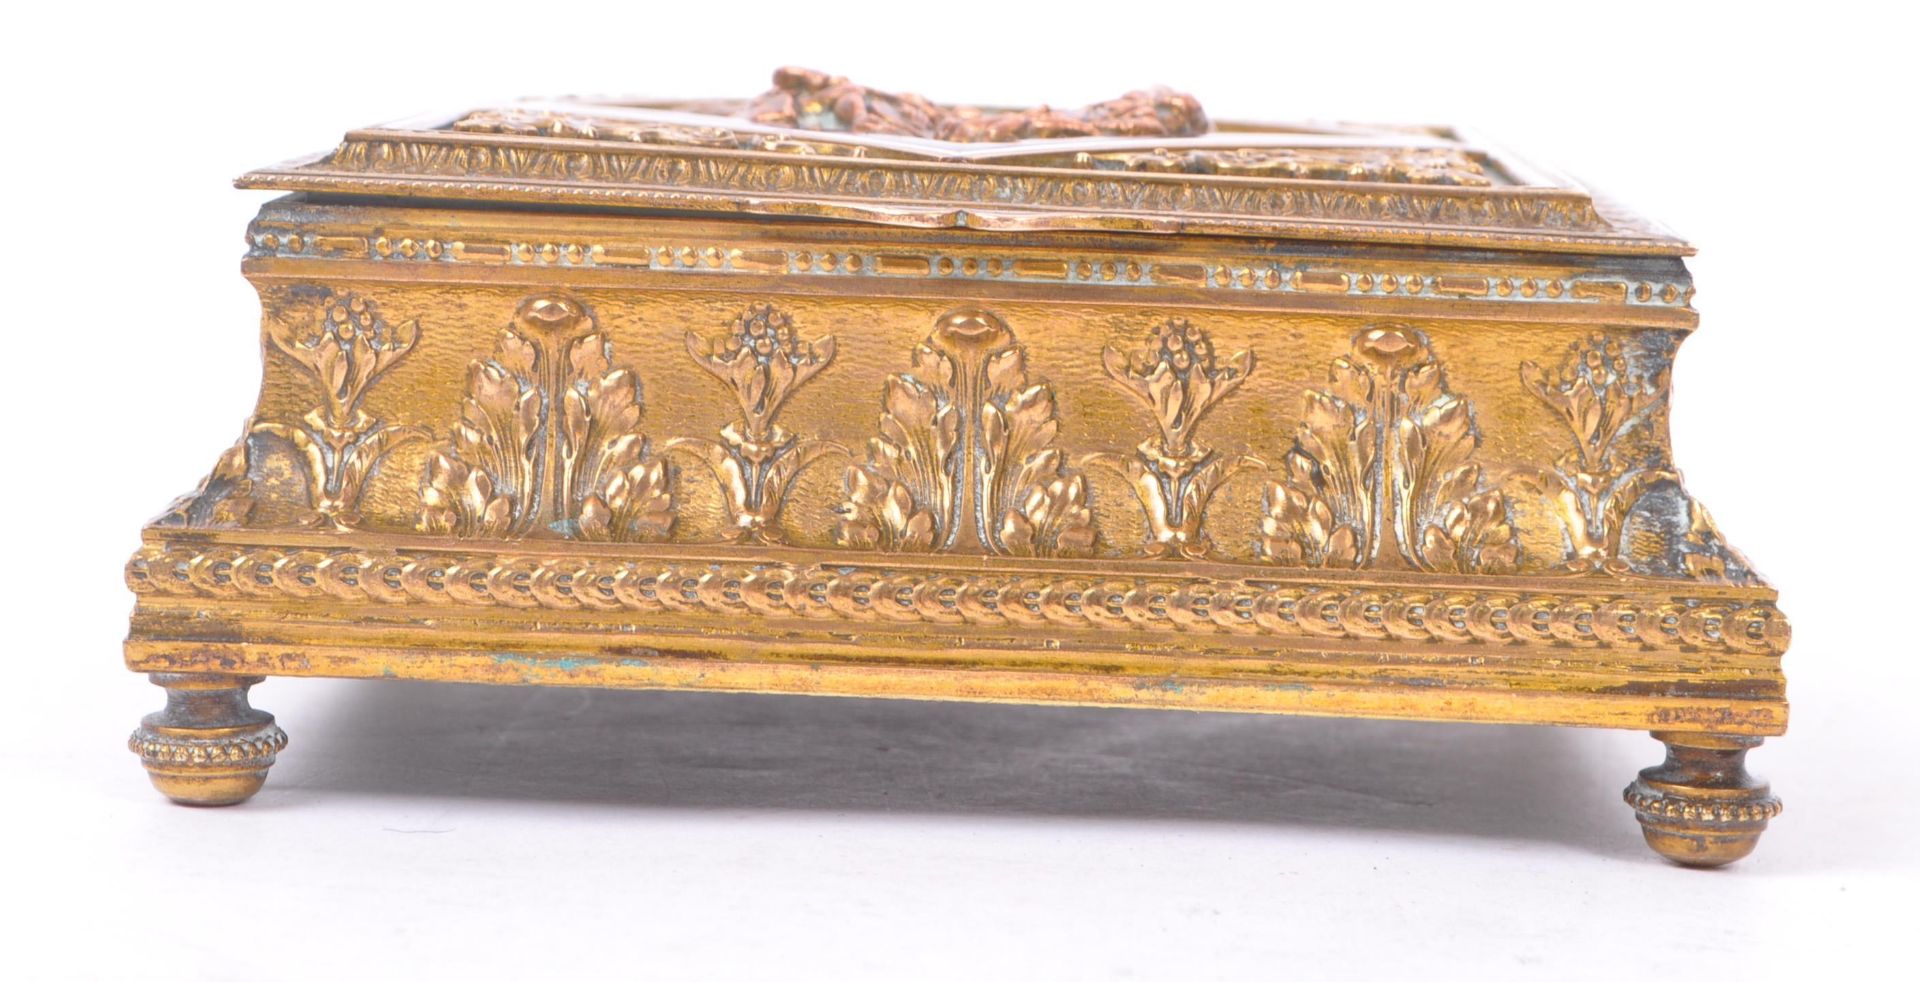 19TH CENTURY FRENCH JEWELLERY BOX WITH ROCOCO SCENE - Image 5 of 6